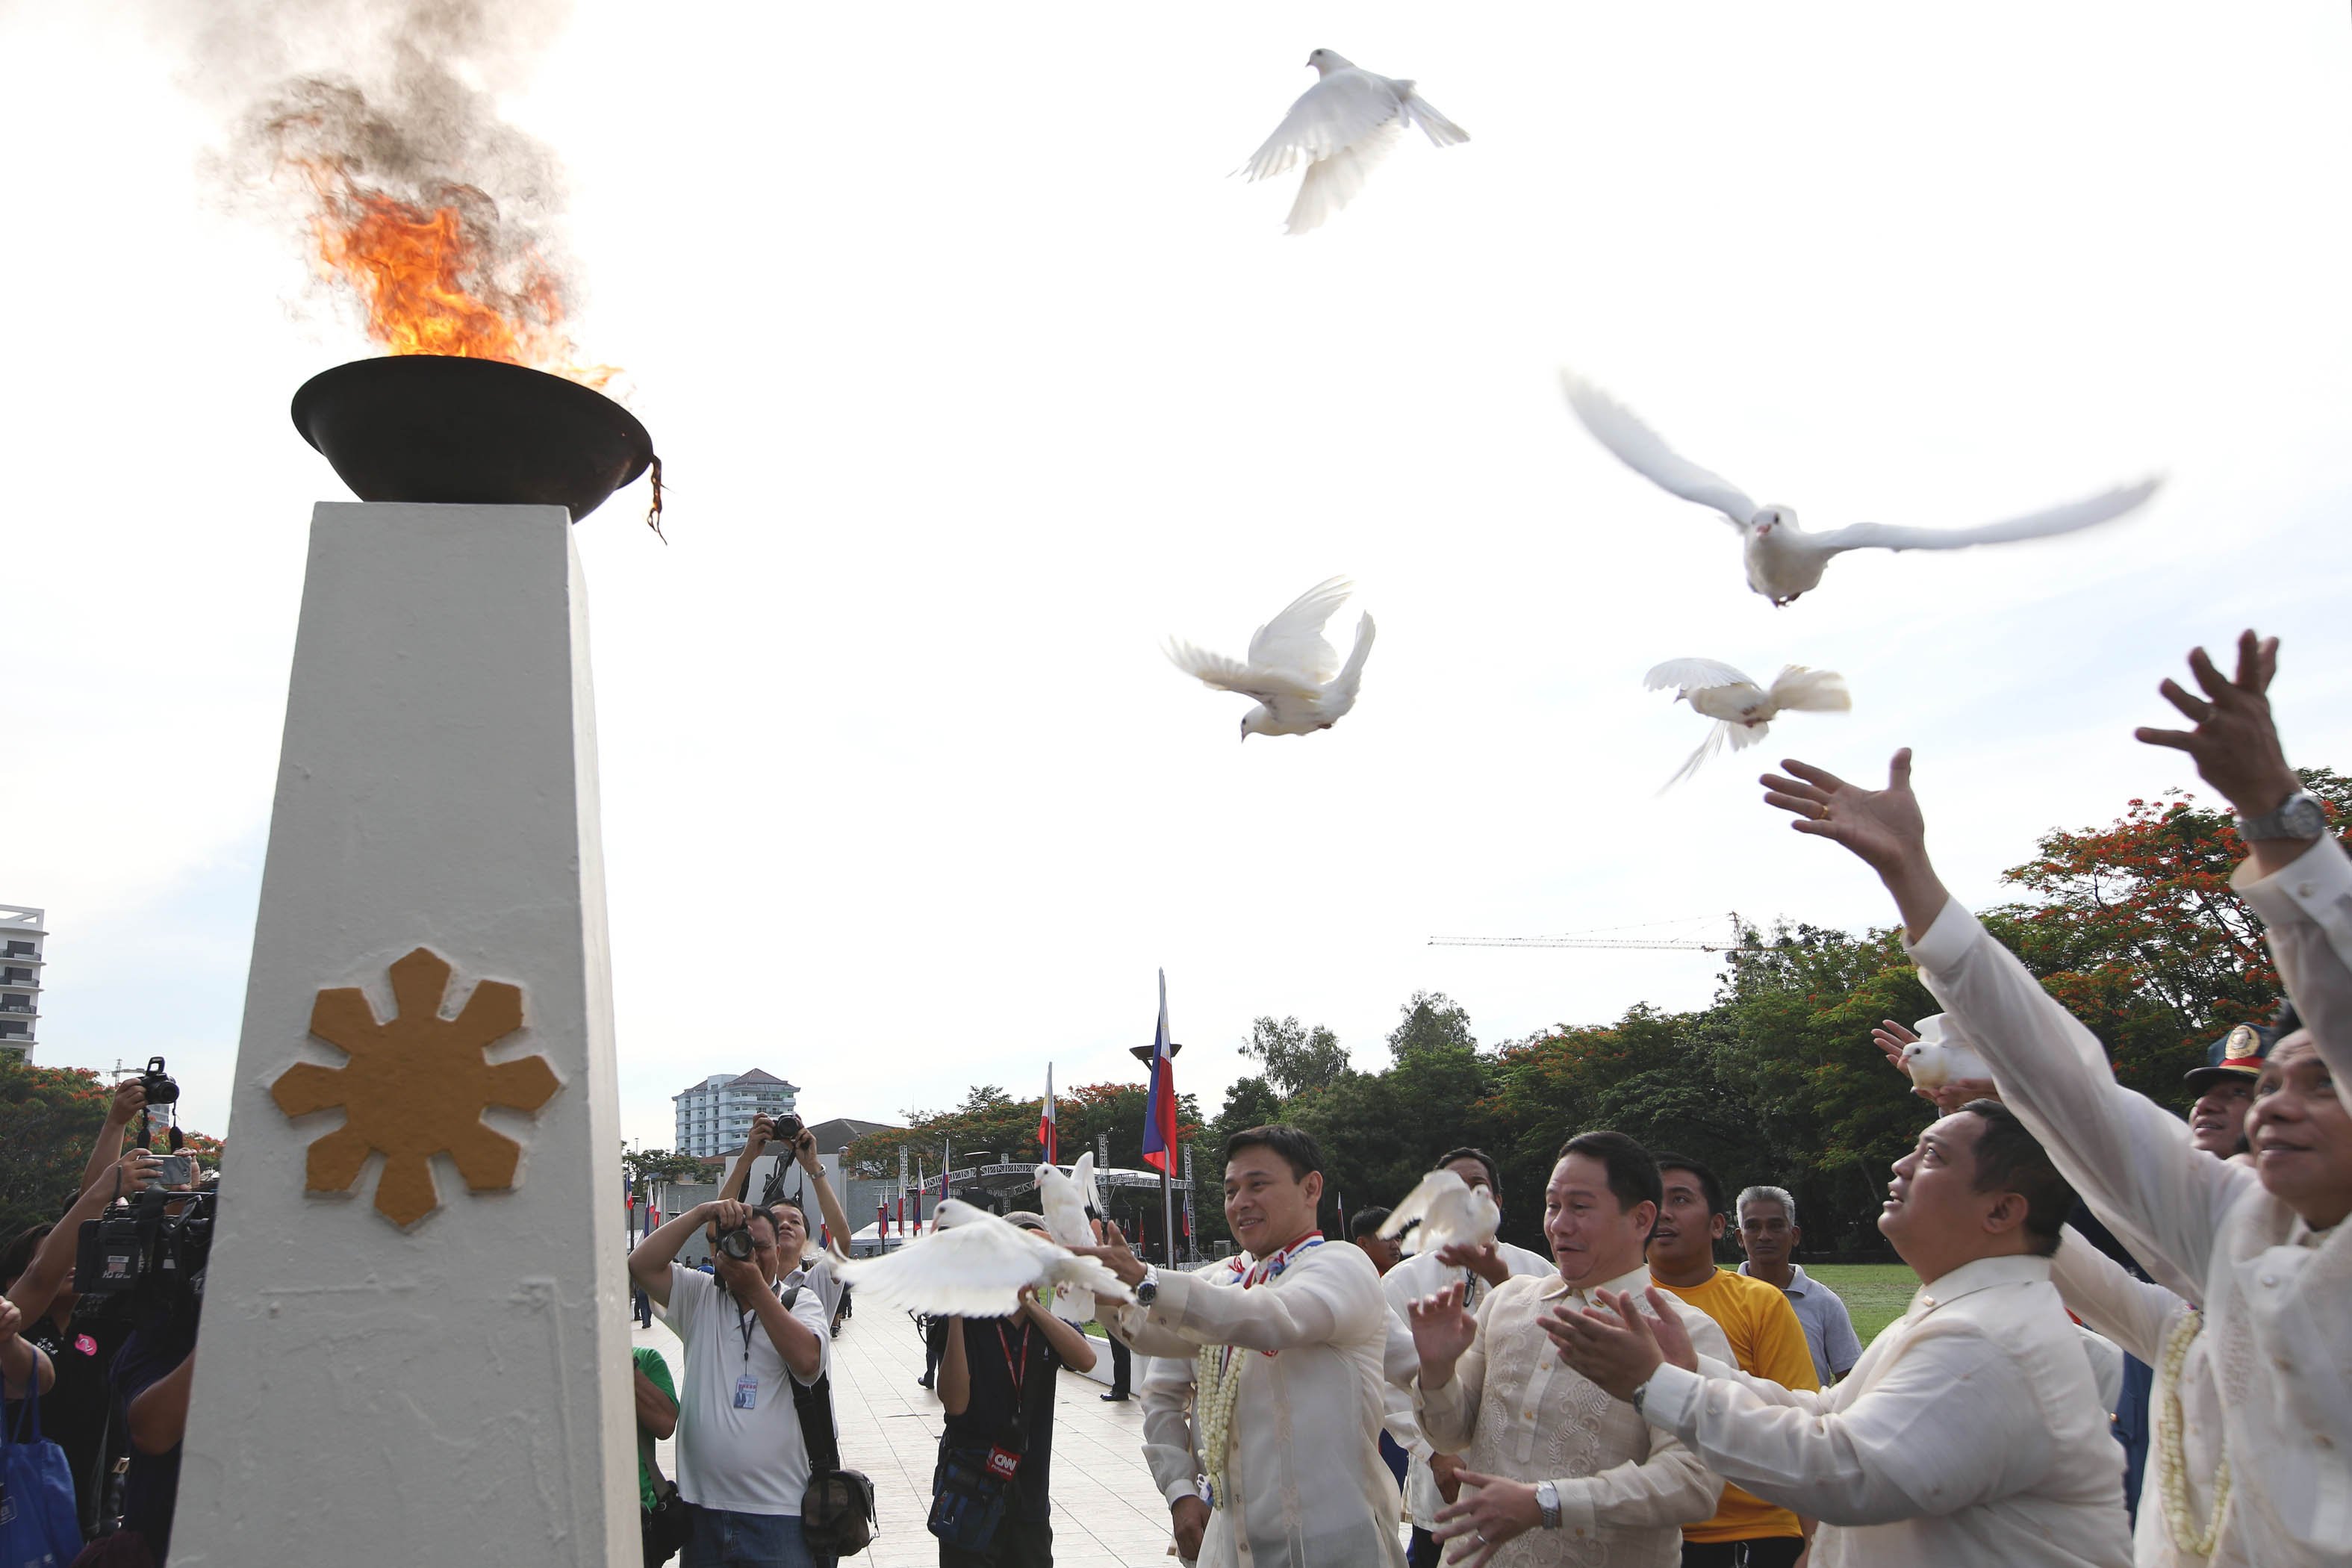 Sen. Angara leads the releasing of white doves in the air during the 119th Independence Day celebration at Pinaglabanan Shrine